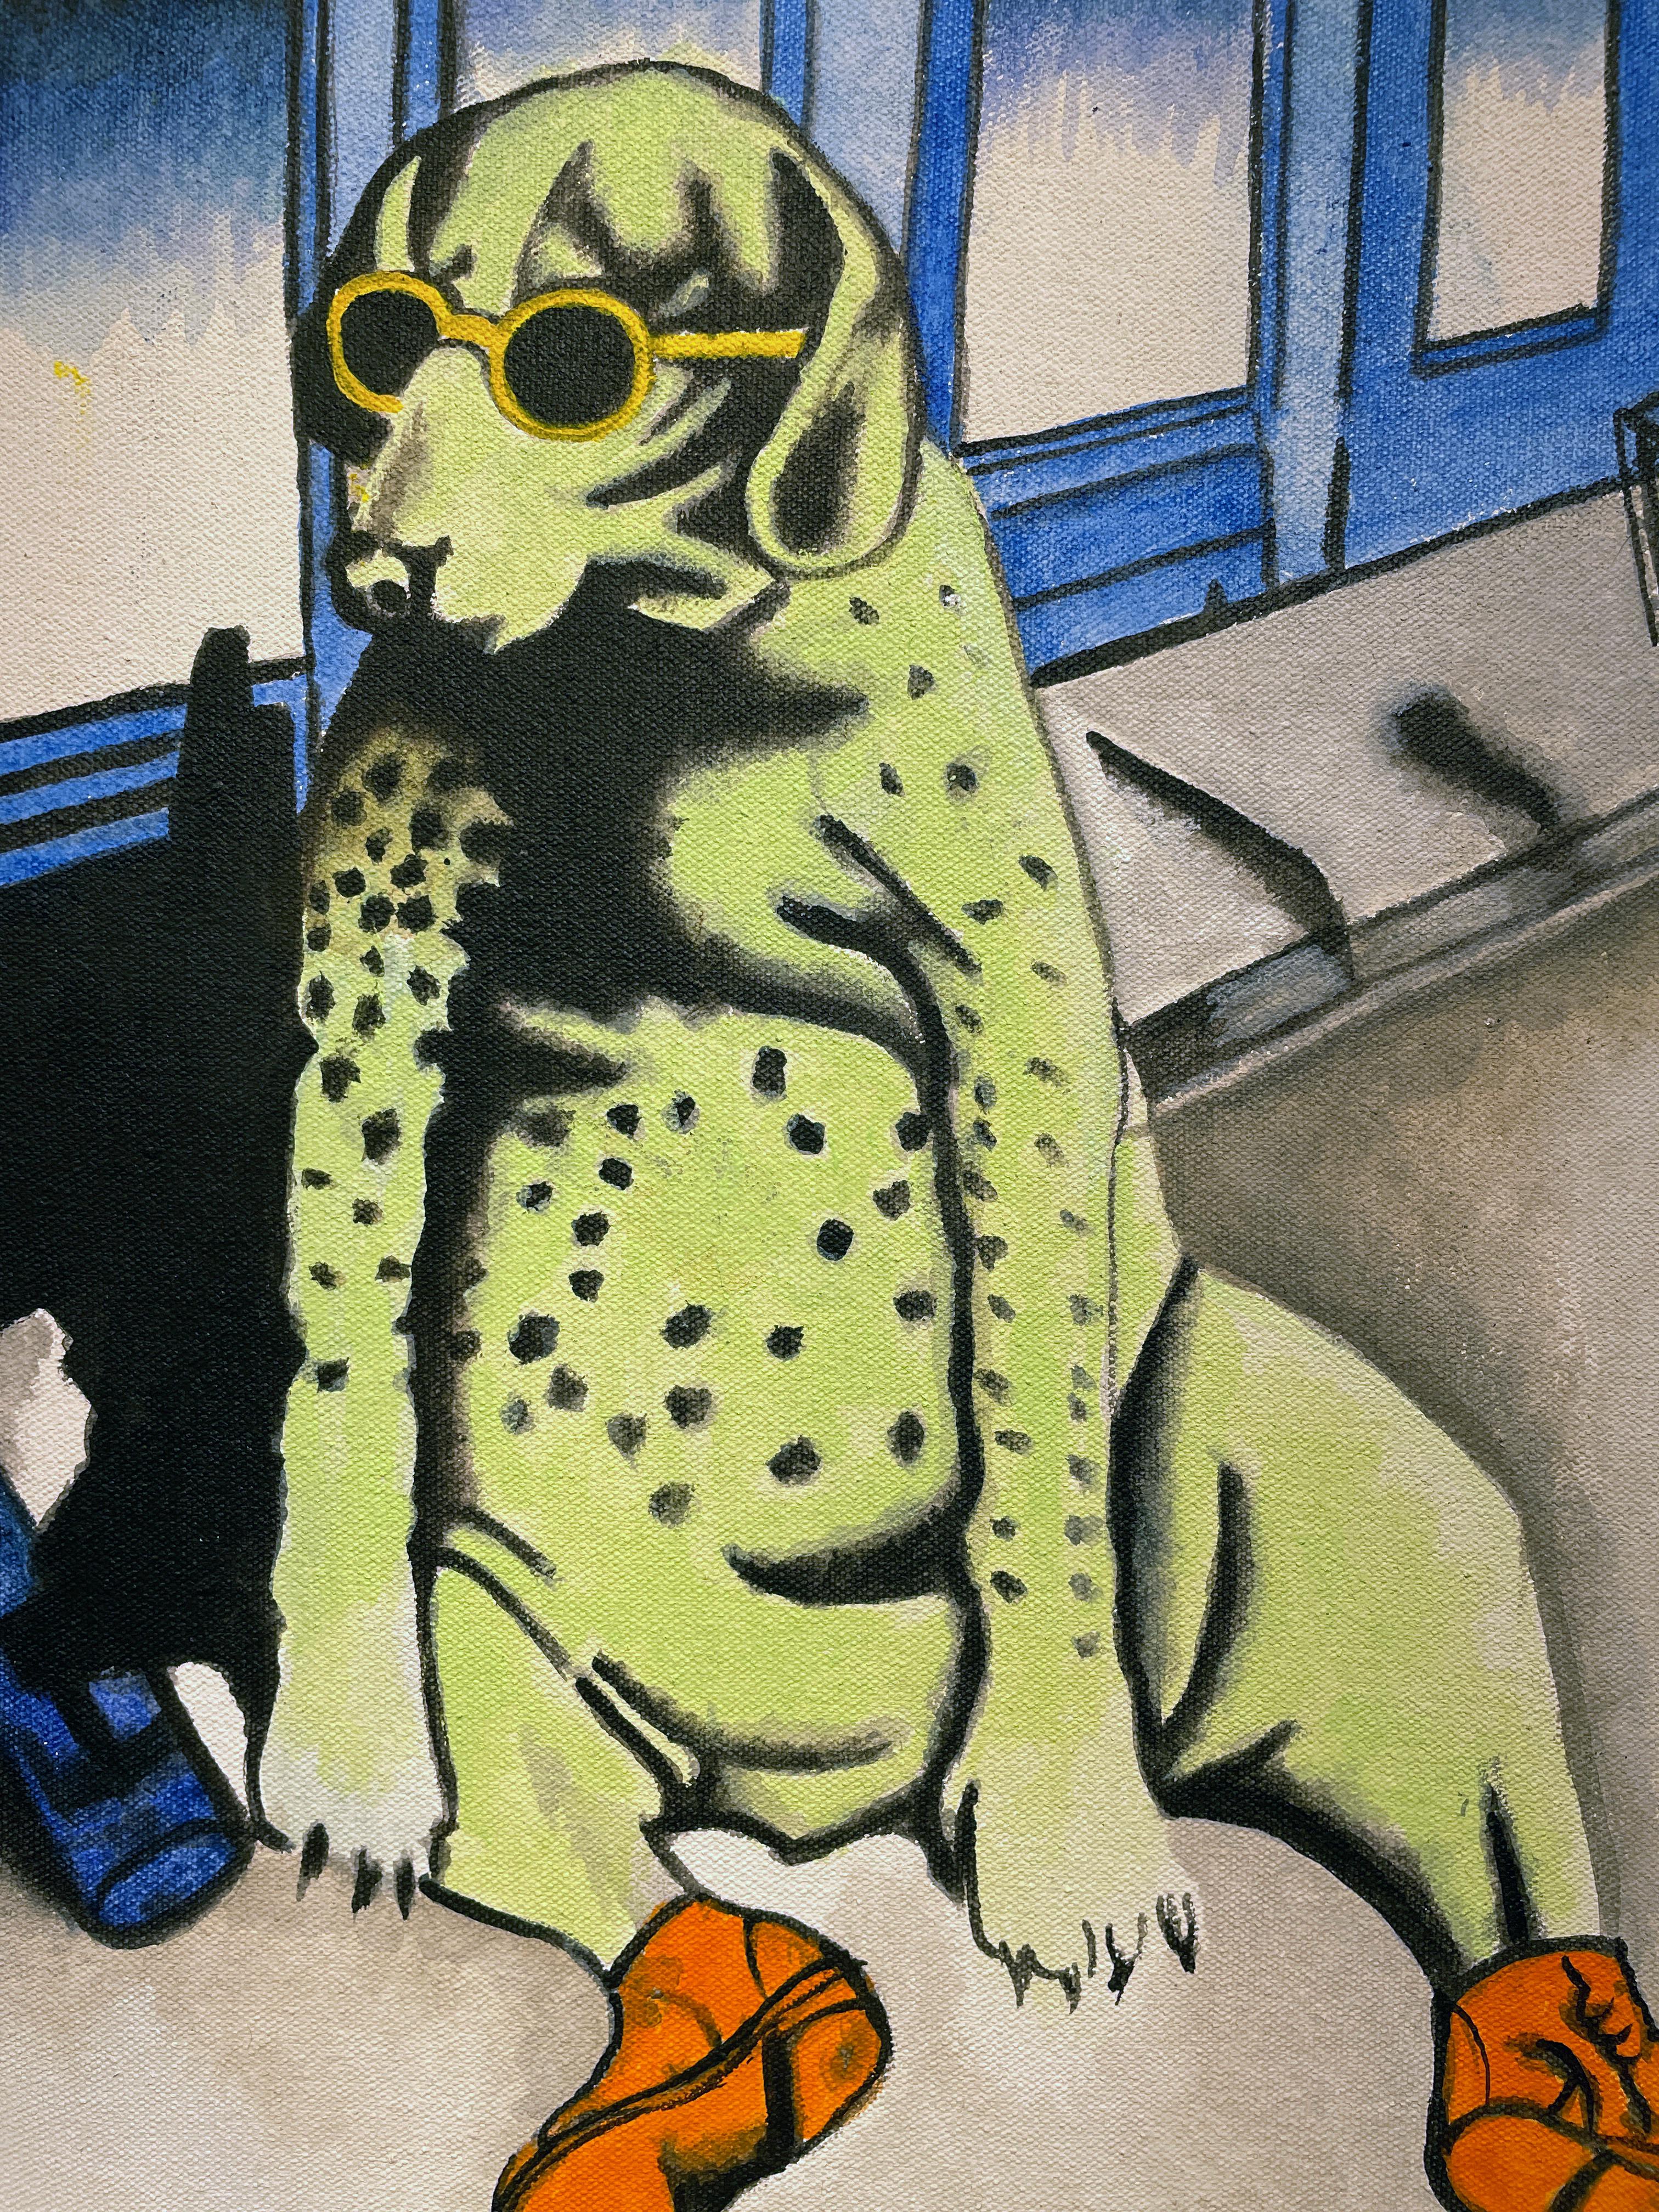 Dog Years - Brightly Colored Self Portrait of Artist as a Lime Green Colored Dog - Contemporary Painting by Marcos Raya